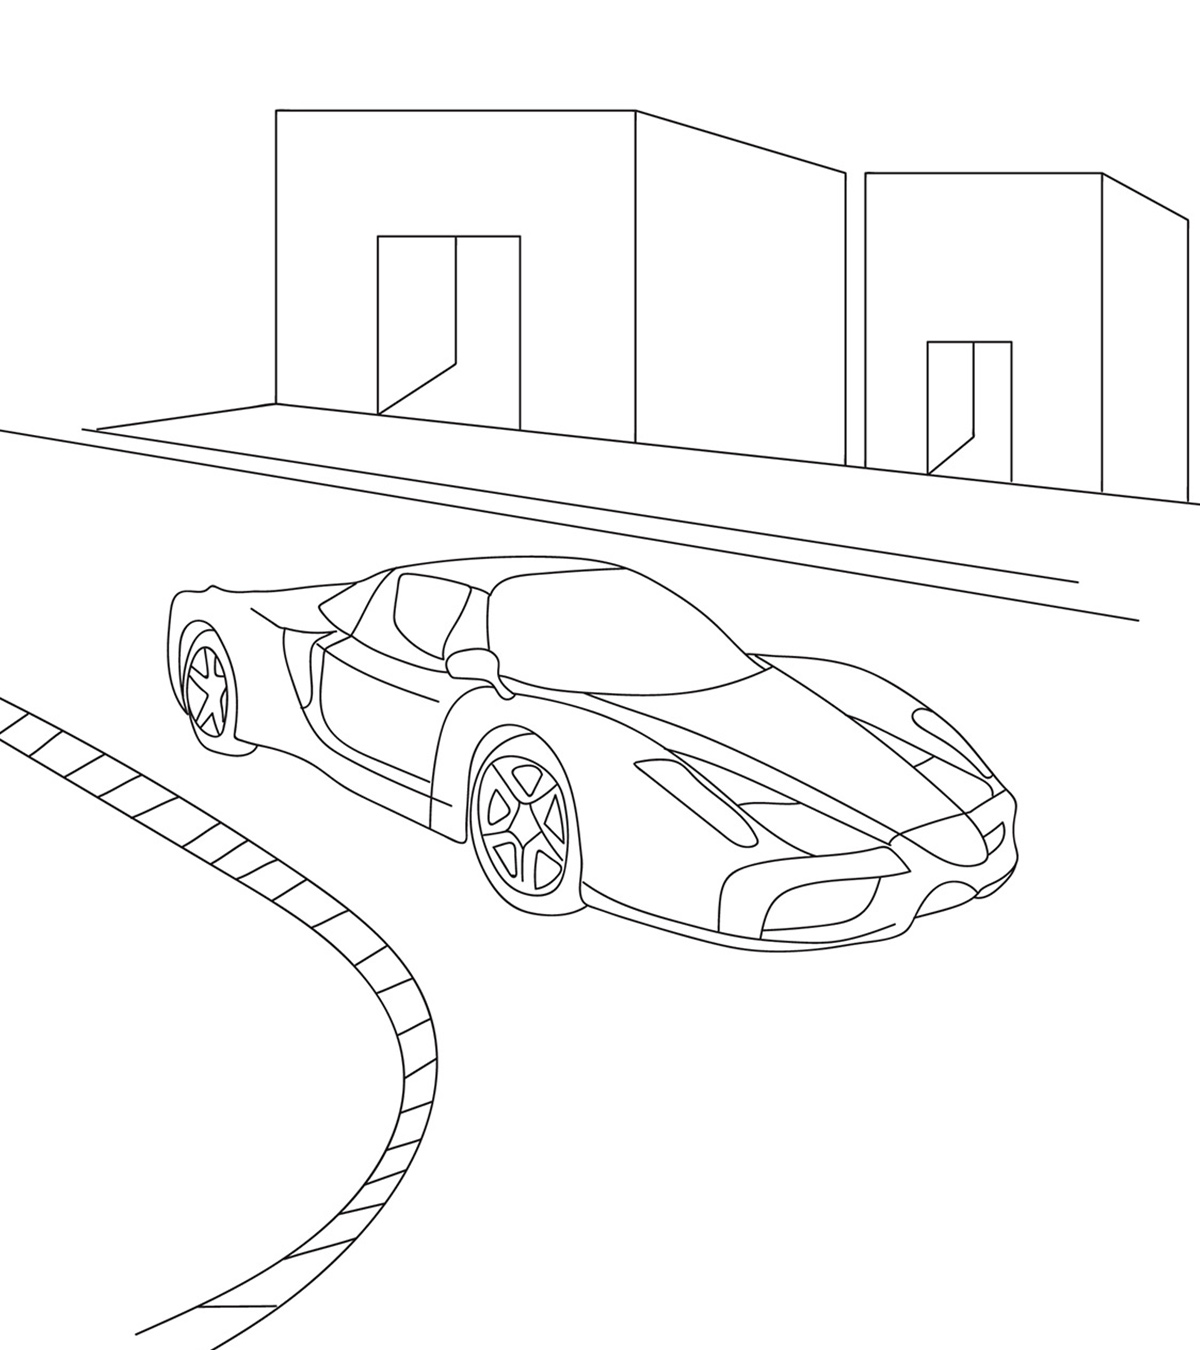 Car Coloring Pages For Adults - Coloring Our World